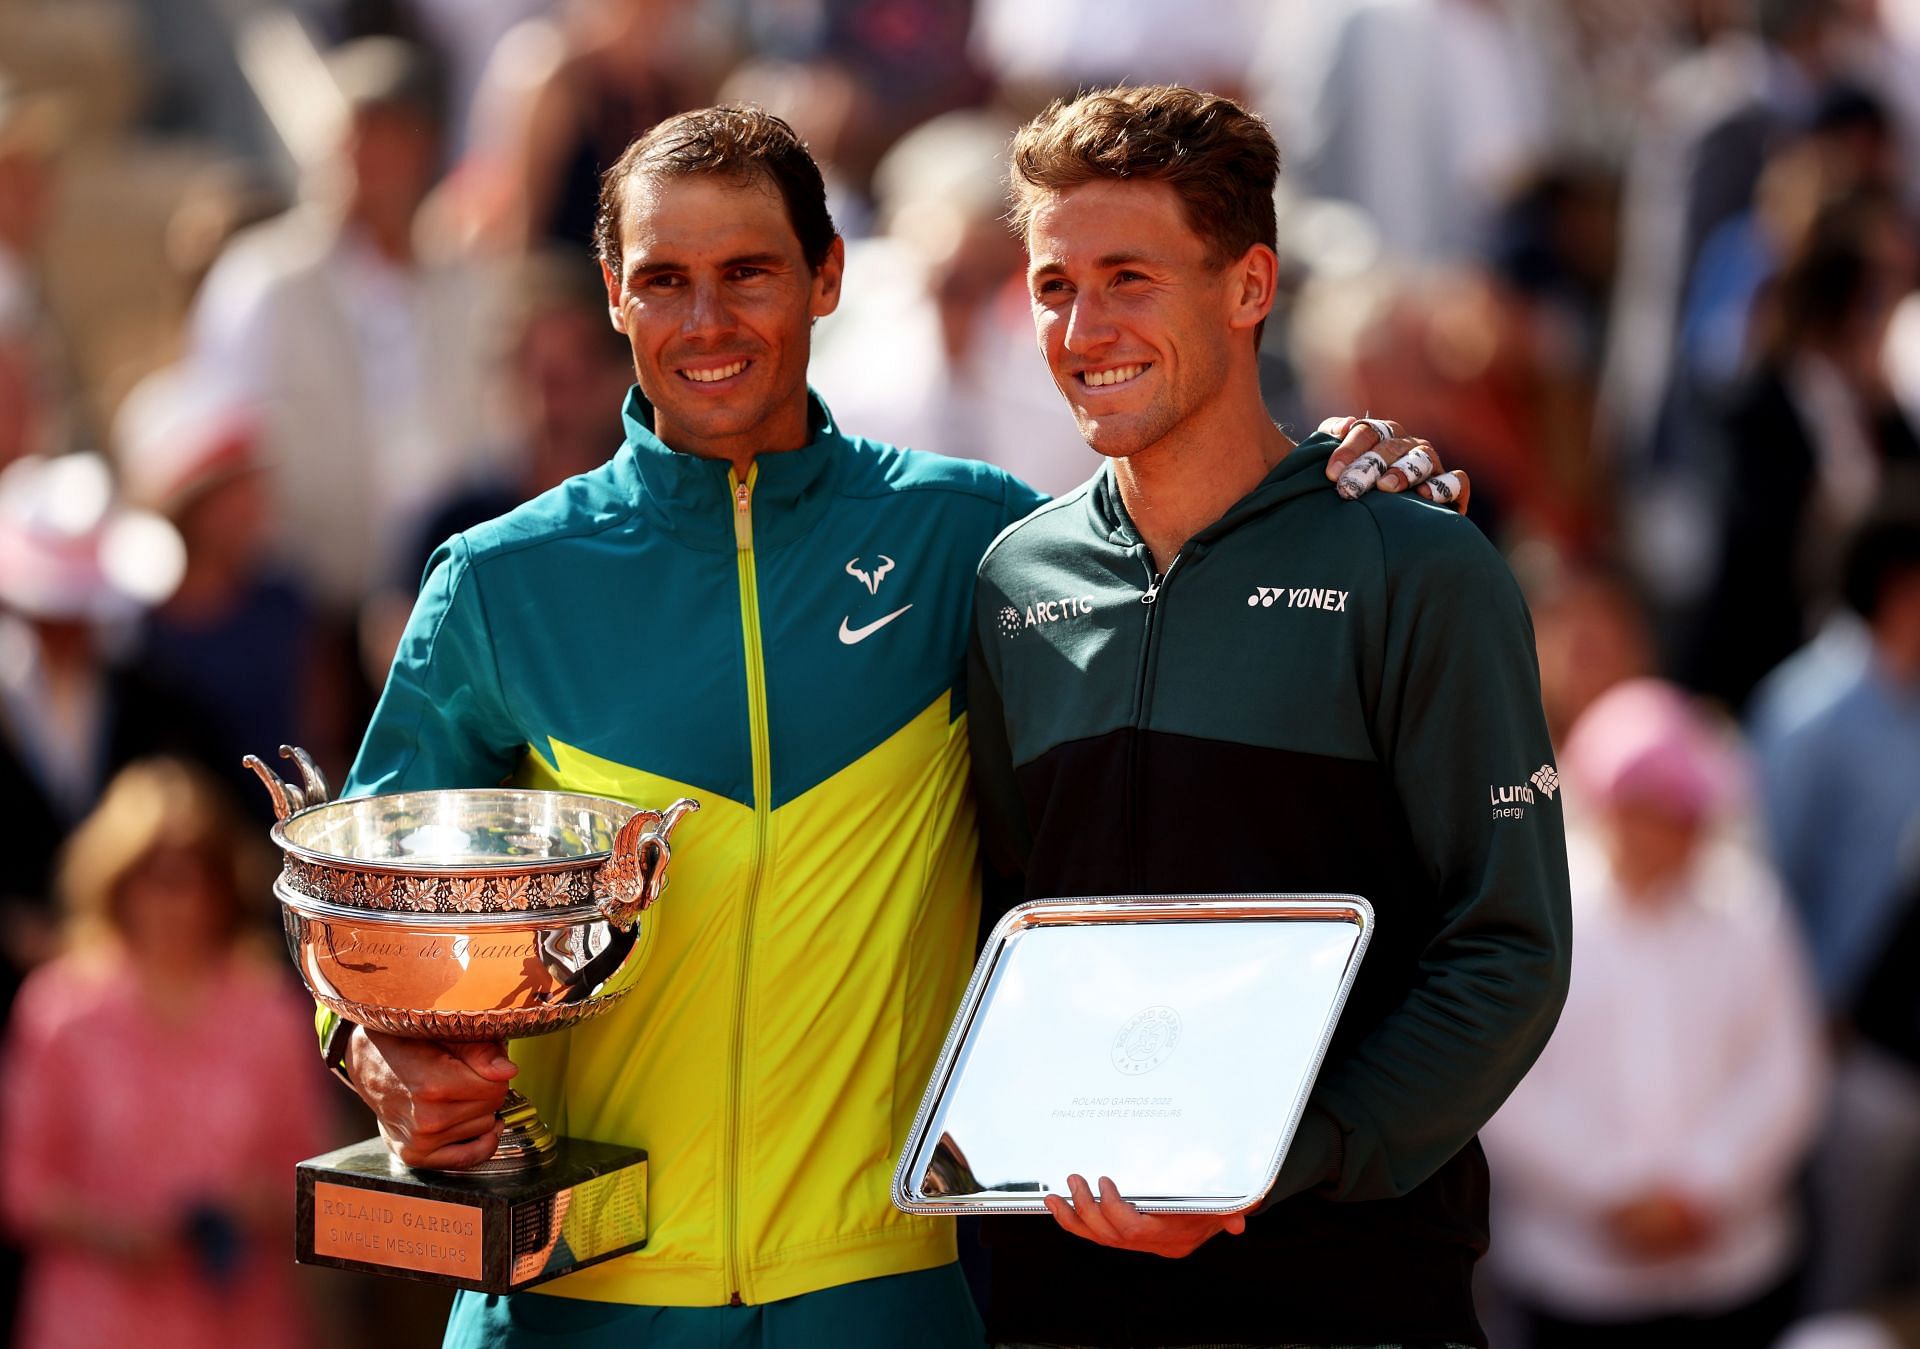 Rafael Nadal defeated Casper Ruud in the 2022 French Open final